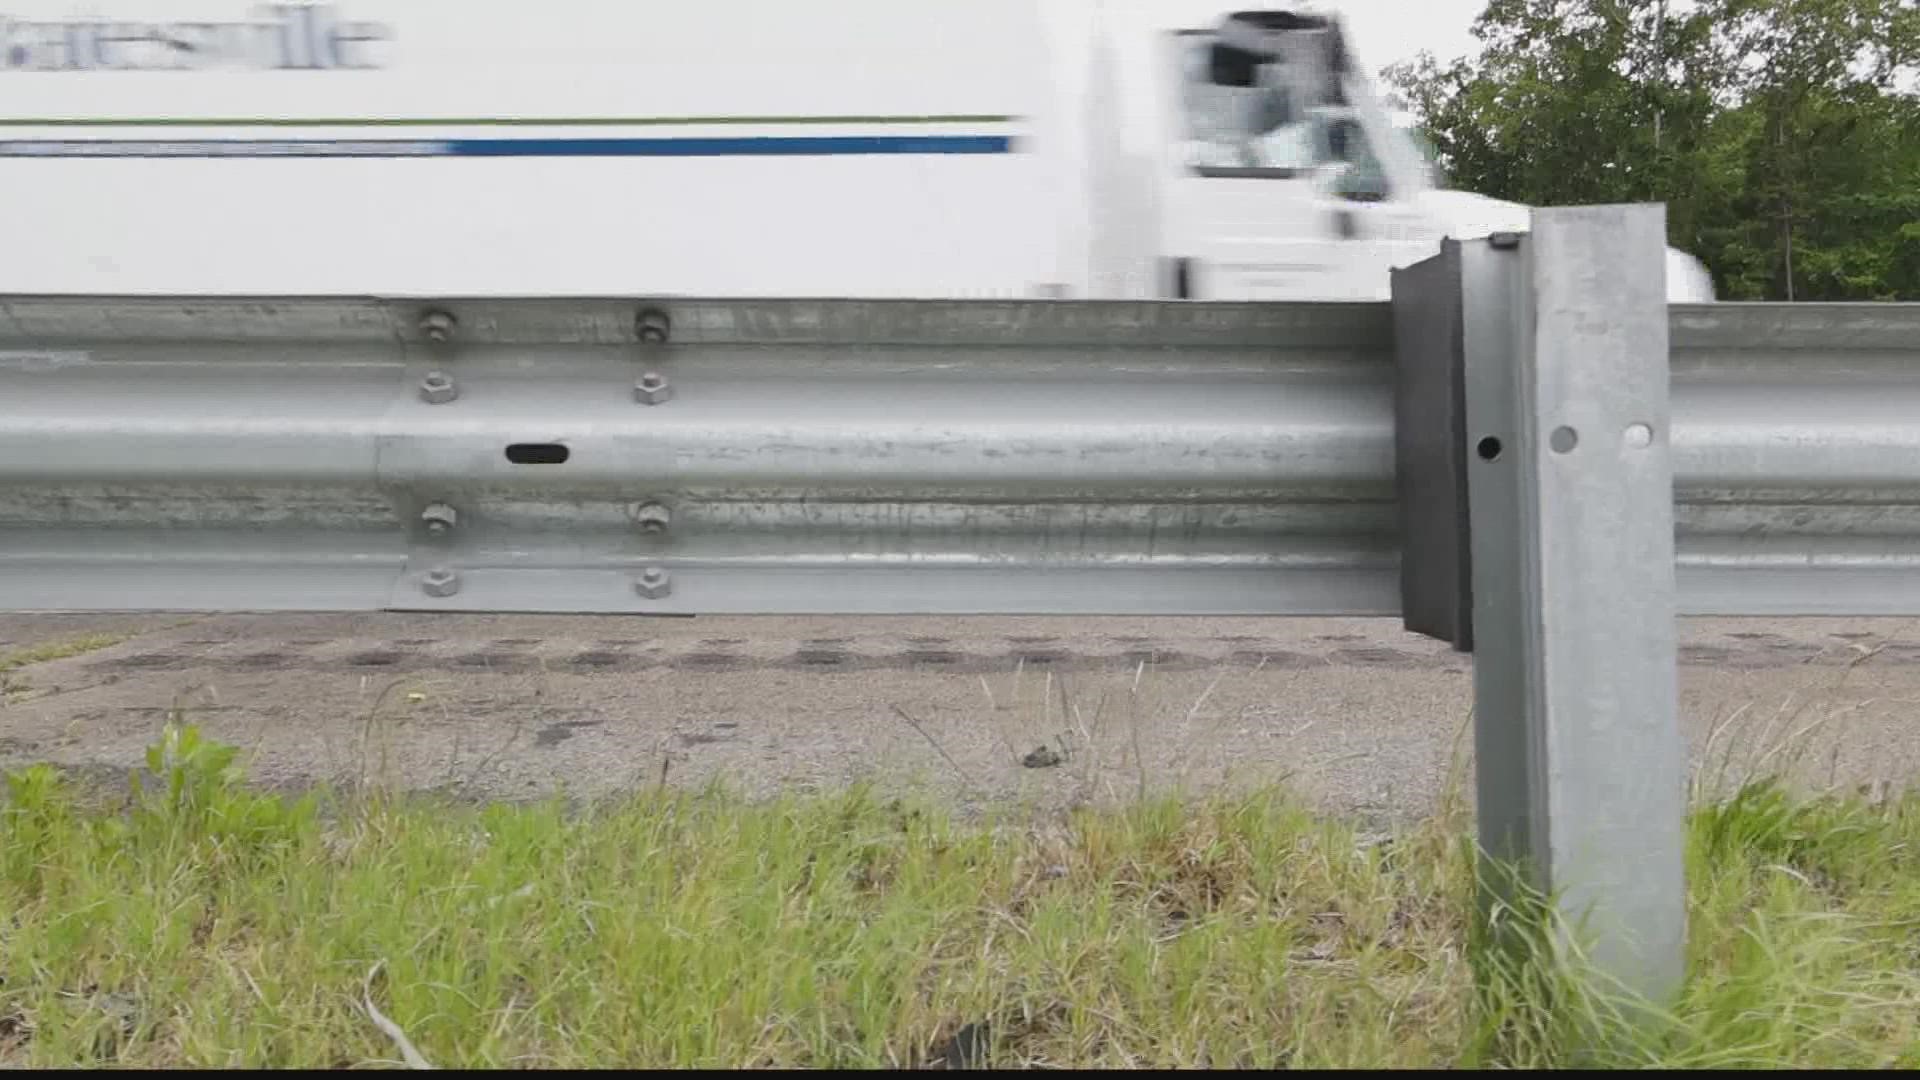 An 11Alive investigation found faulty guardrails on Georgia's roads that a family blames for the death of their daughter.